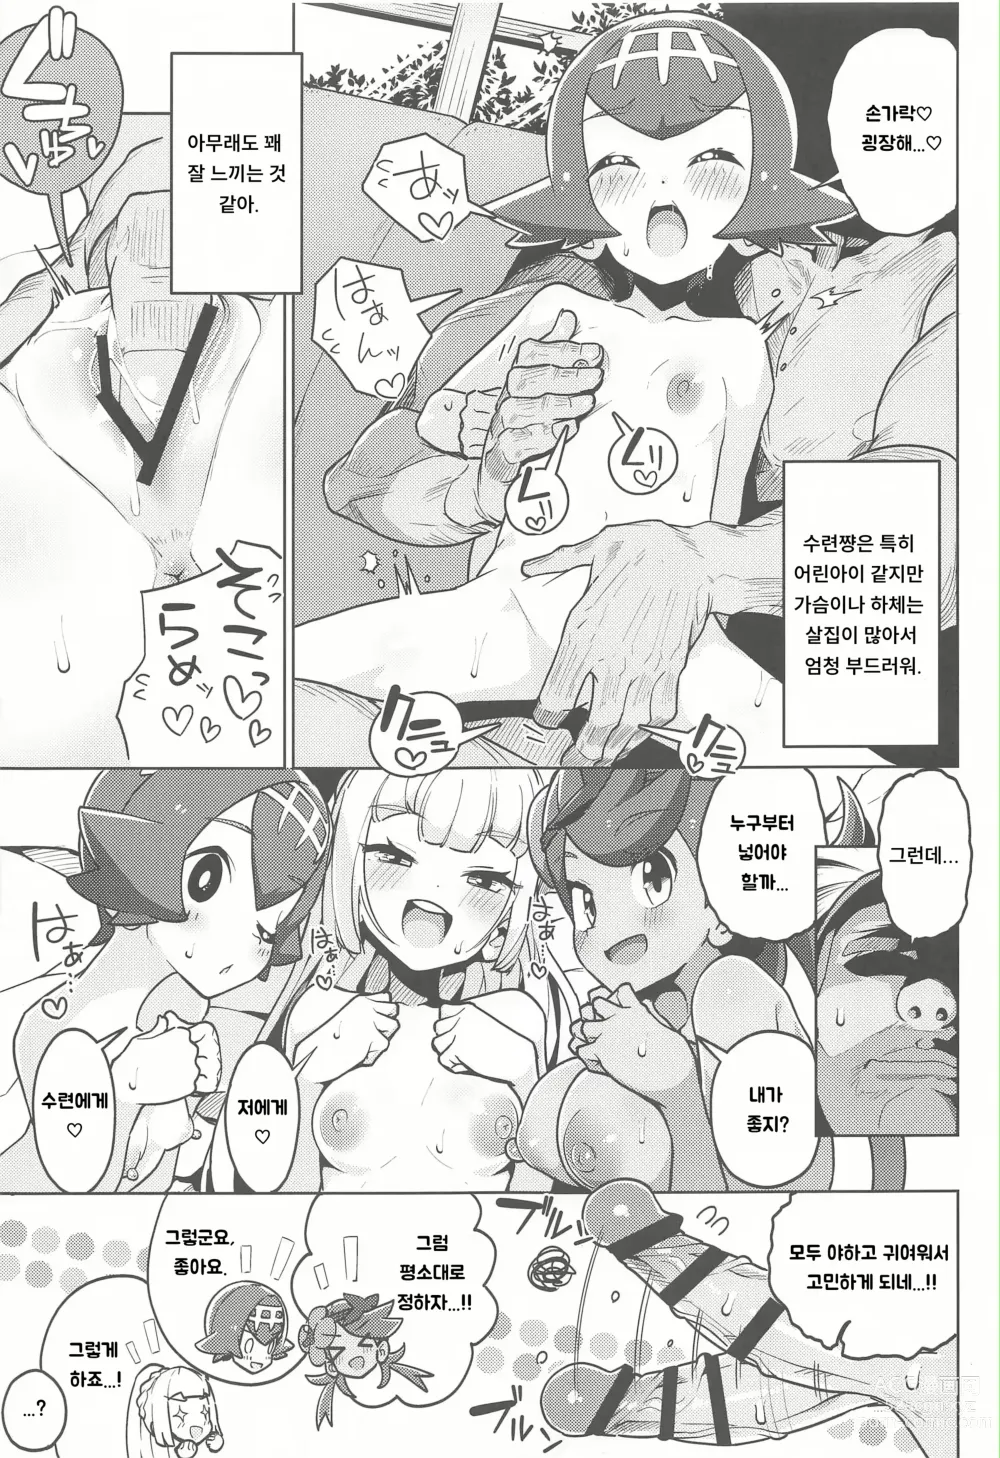 Page 10 of doujinshi 포켓 빗치 2